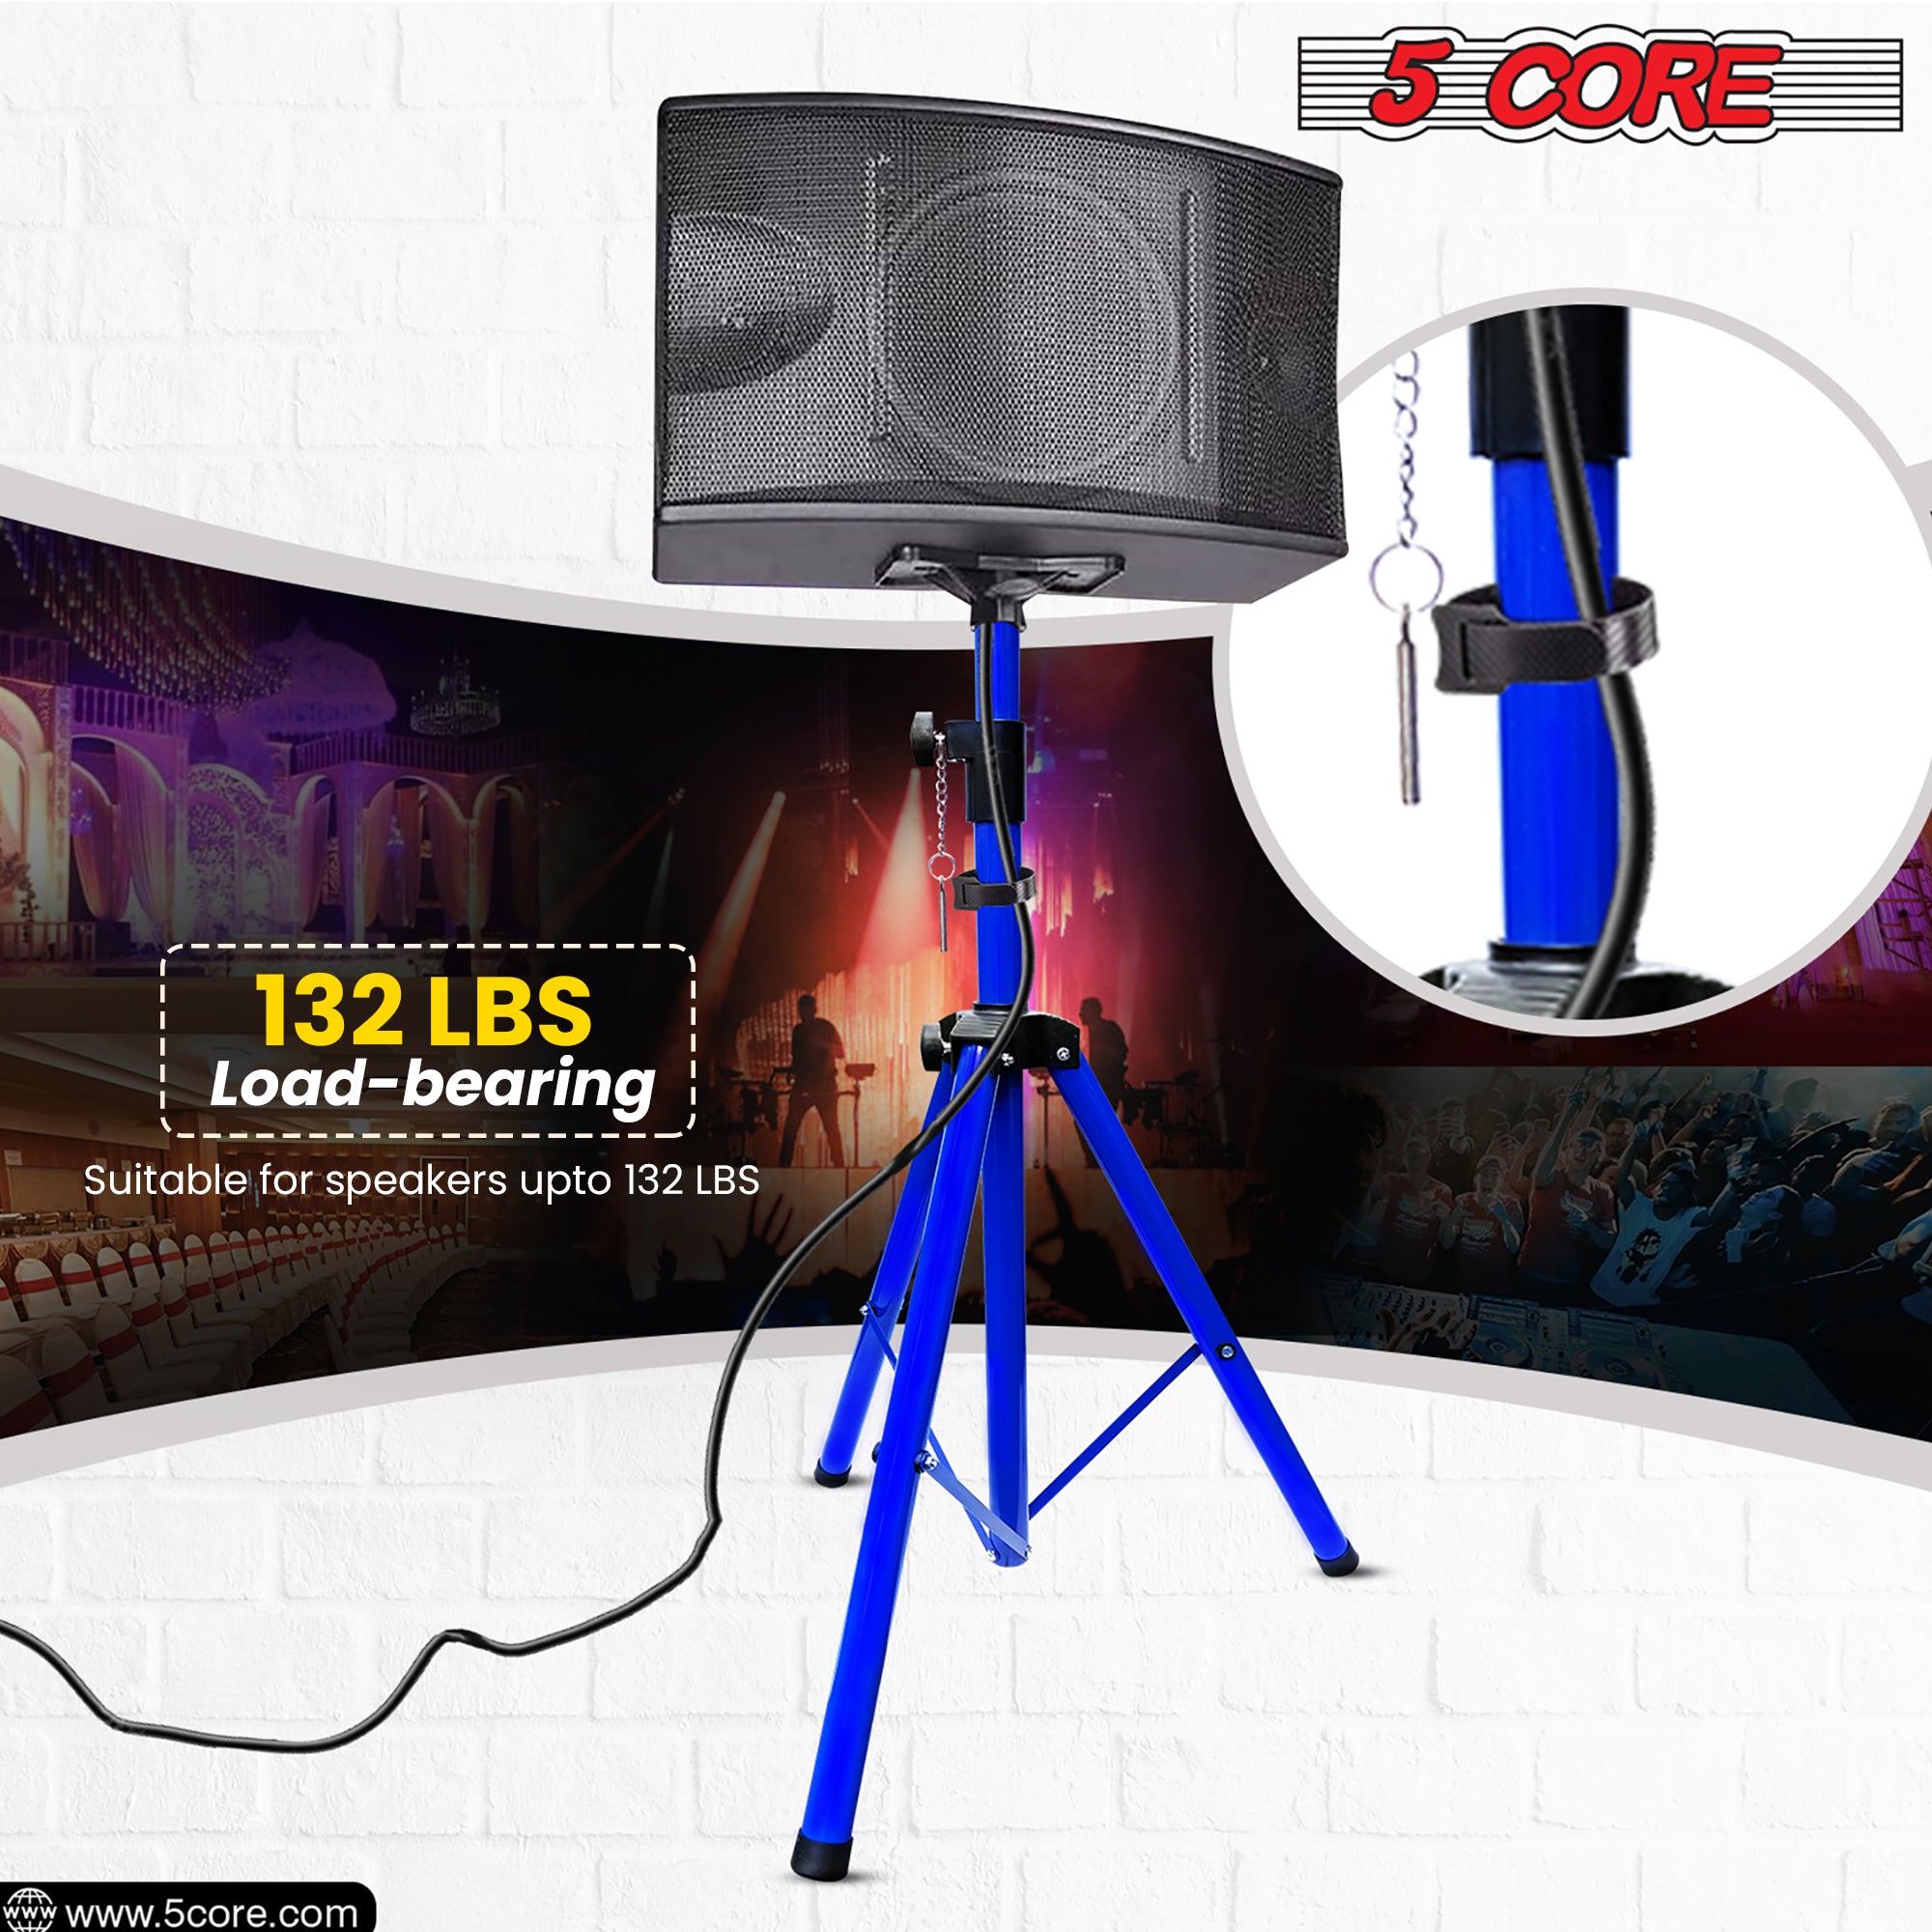 5 Core Speakers Stands 1 Piece Blue Heavy Duty Height Adjustable Tripod PA Speaker Stand For Large Speakers DJ Stand Para Bocinas Includes Carry Bag- SS HD 1 PK BLU BAG